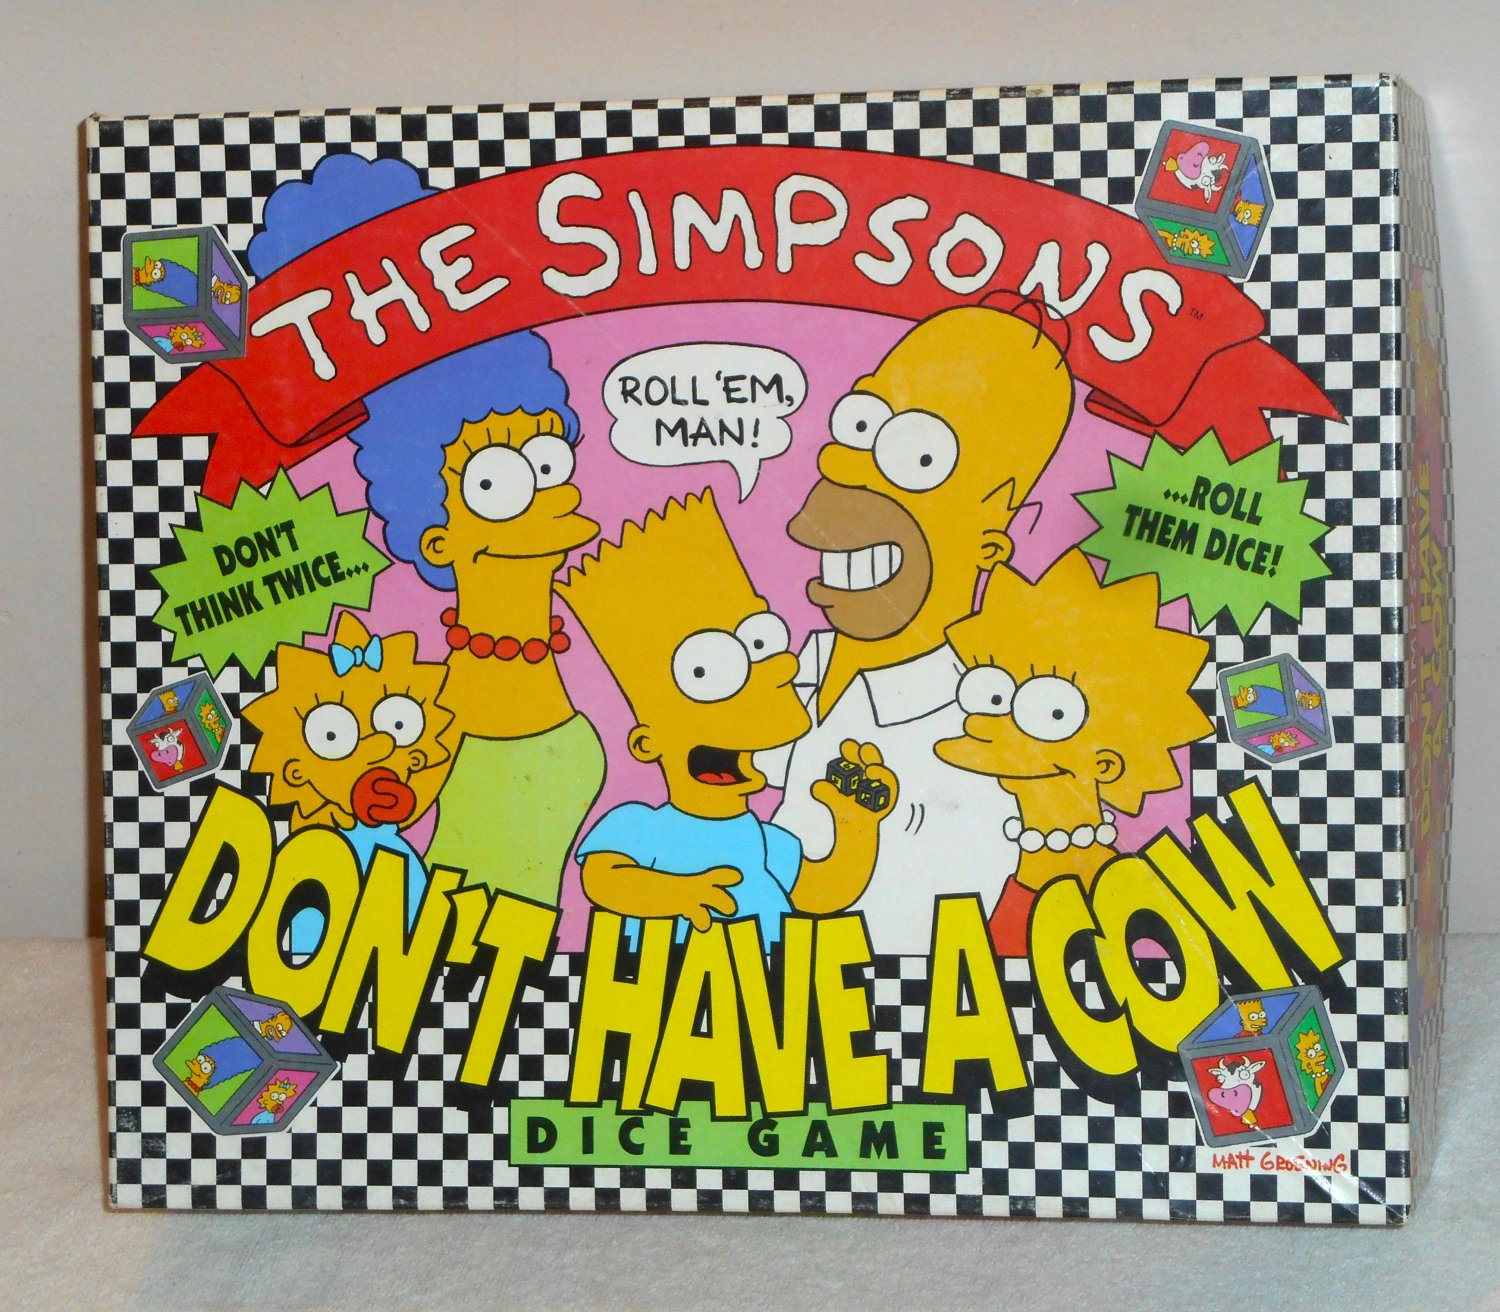 Don't Have a Cow Dice Game MB 4025 Homer Bart Marge Lisa Maggie Complete 1990 The Simpsons